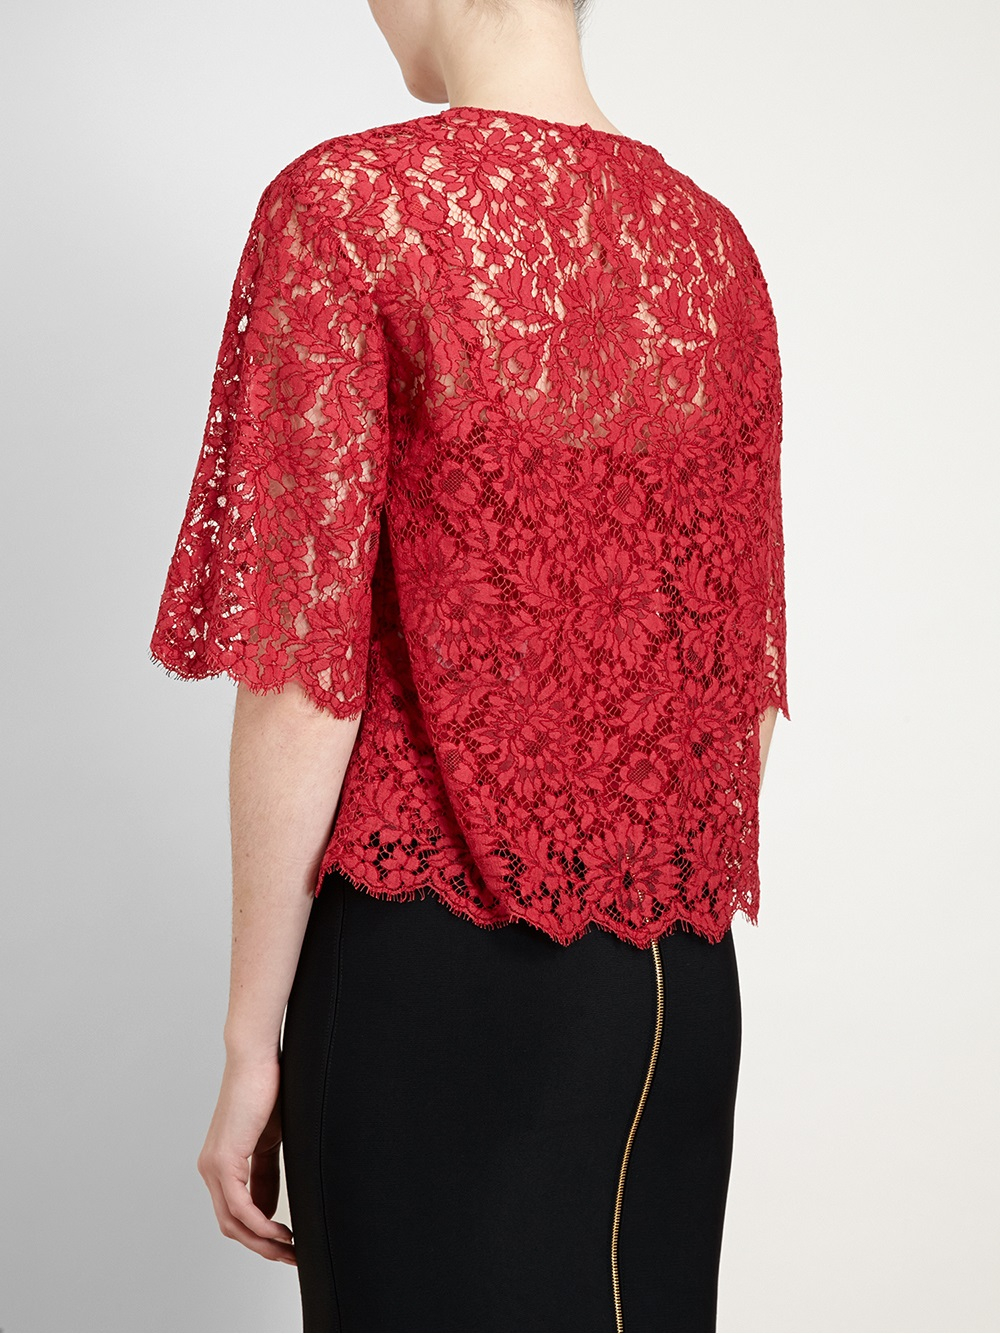 Dolce & gabbana Floral Lace Top in Red | Lyst